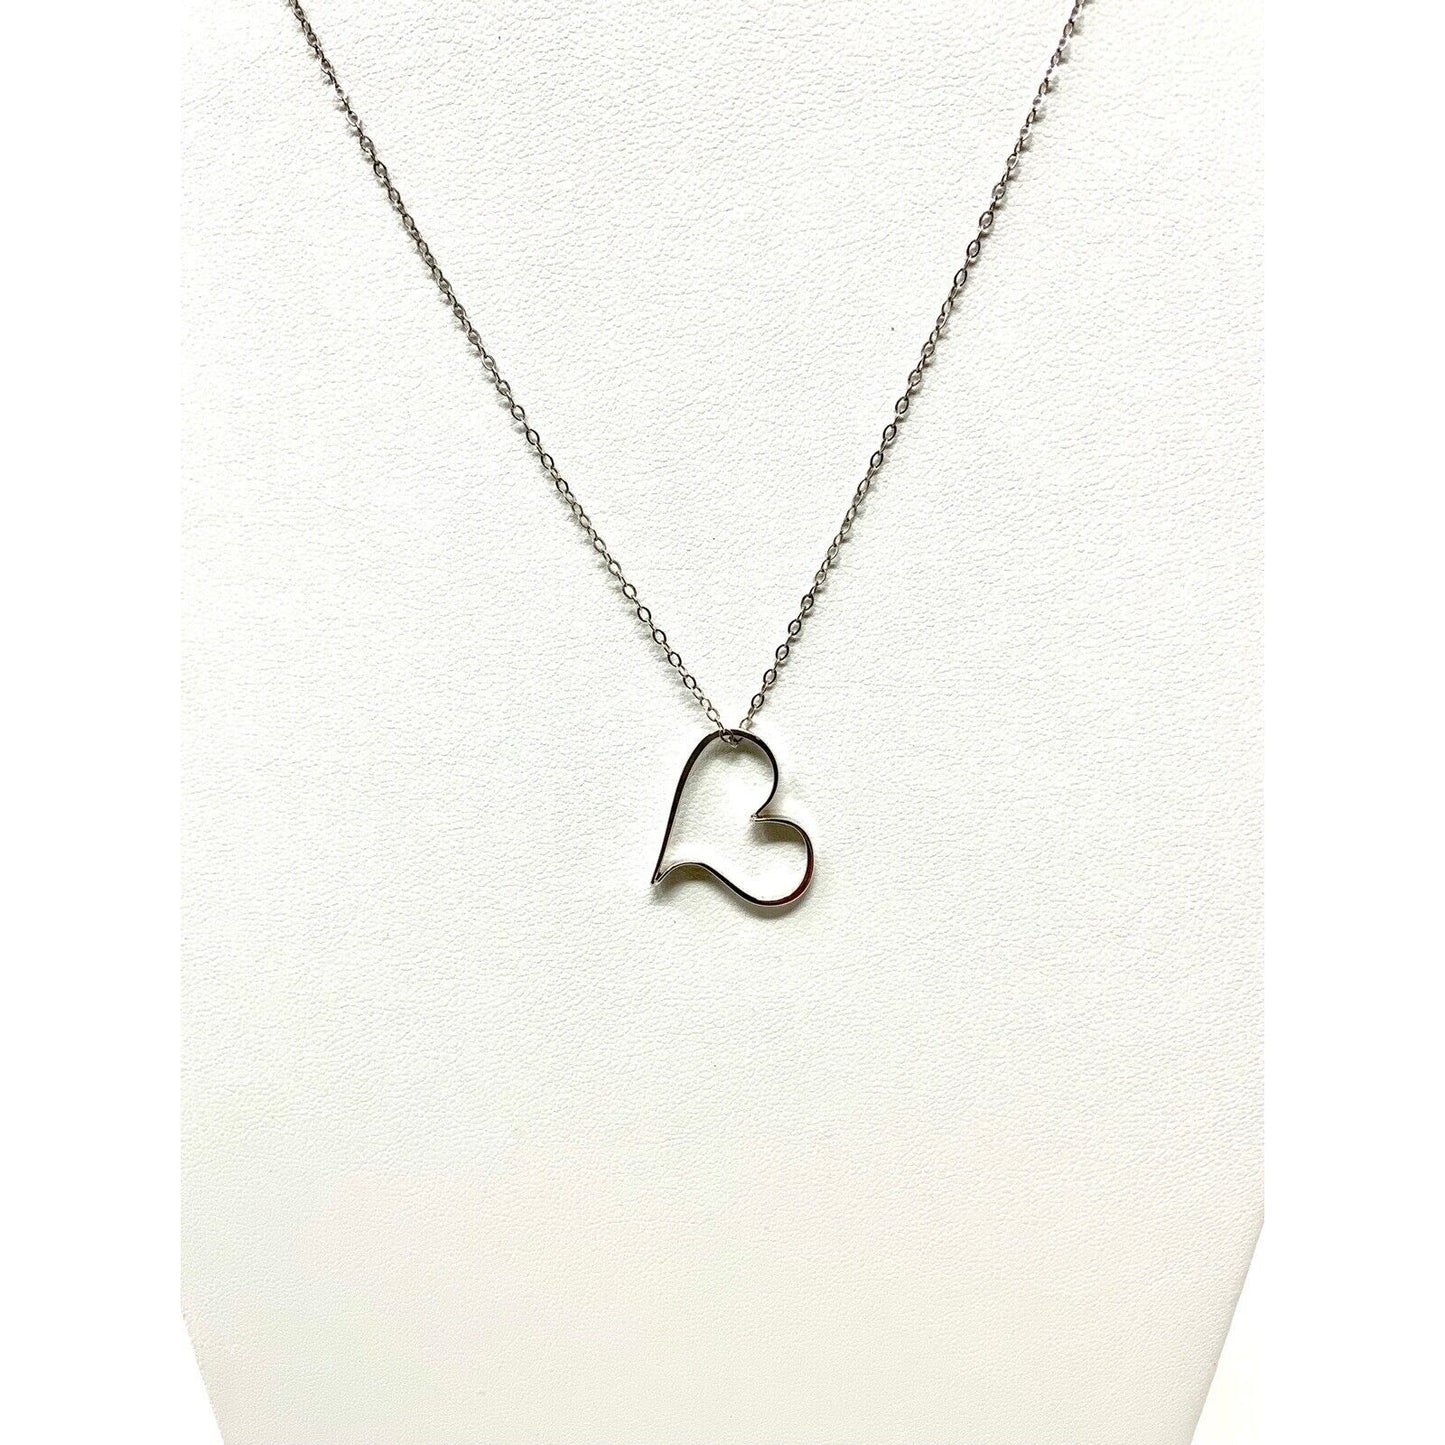 Silver Palladium-Plated Heart Pendant and Necklace